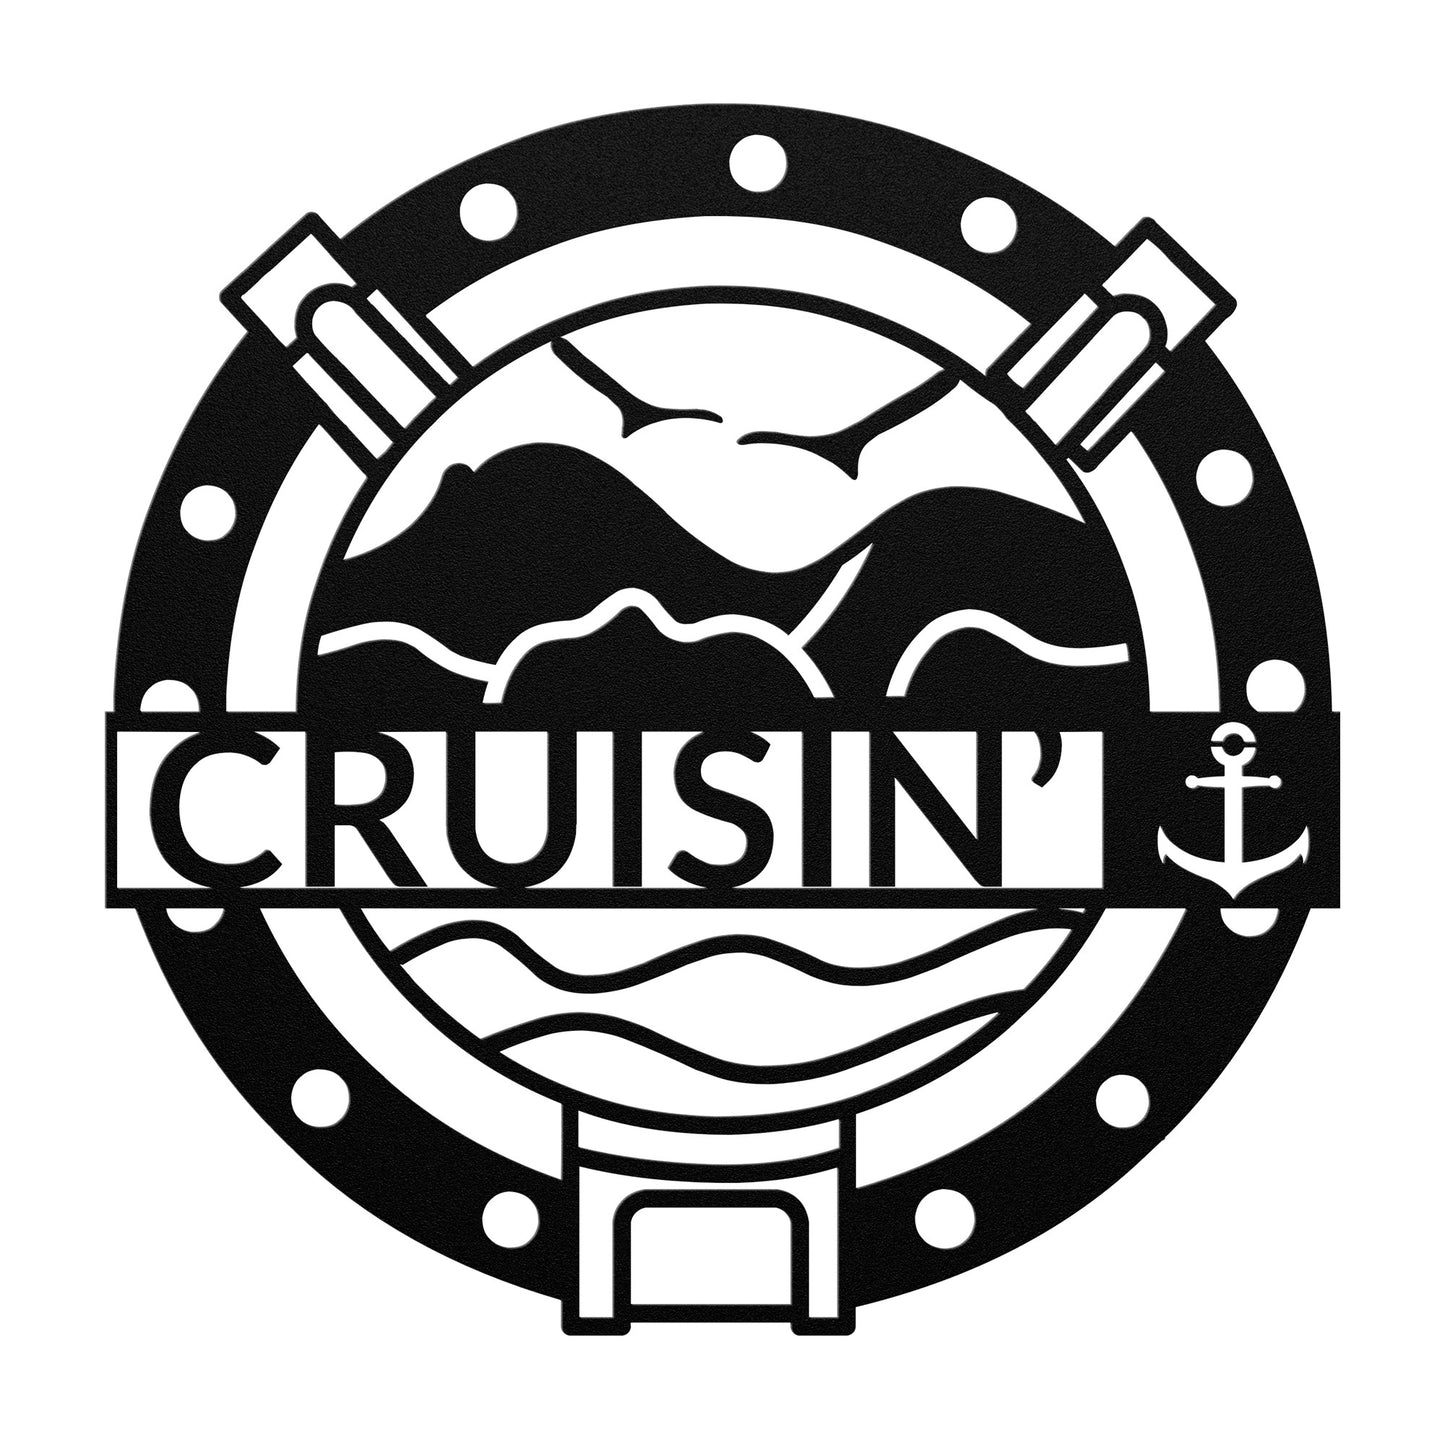 Cruise Metal Wall Decor, Cruise Ship Porthole Wall Art For Your Favorite Cruise Lover